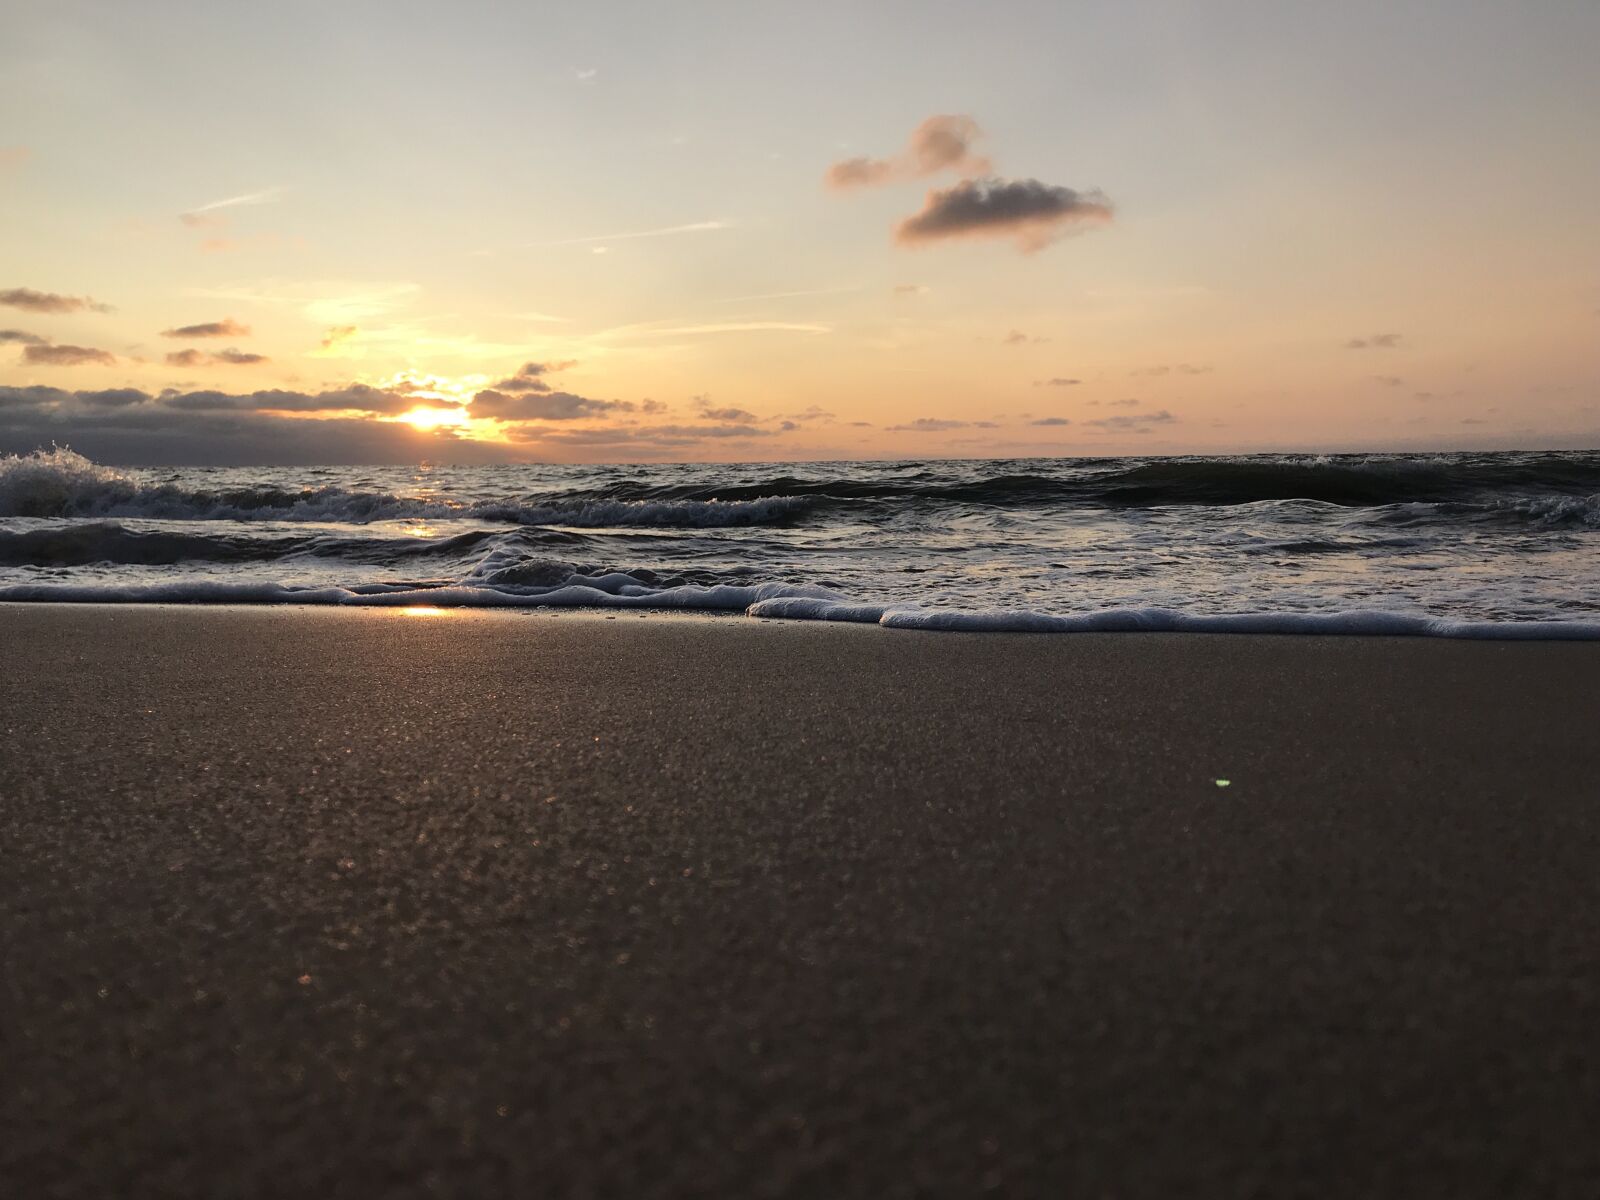 Apple iPhone 7 + iPhone 7 back camera 3.99mm f/1.8 sample photo. Sunset, sand, ocean photography